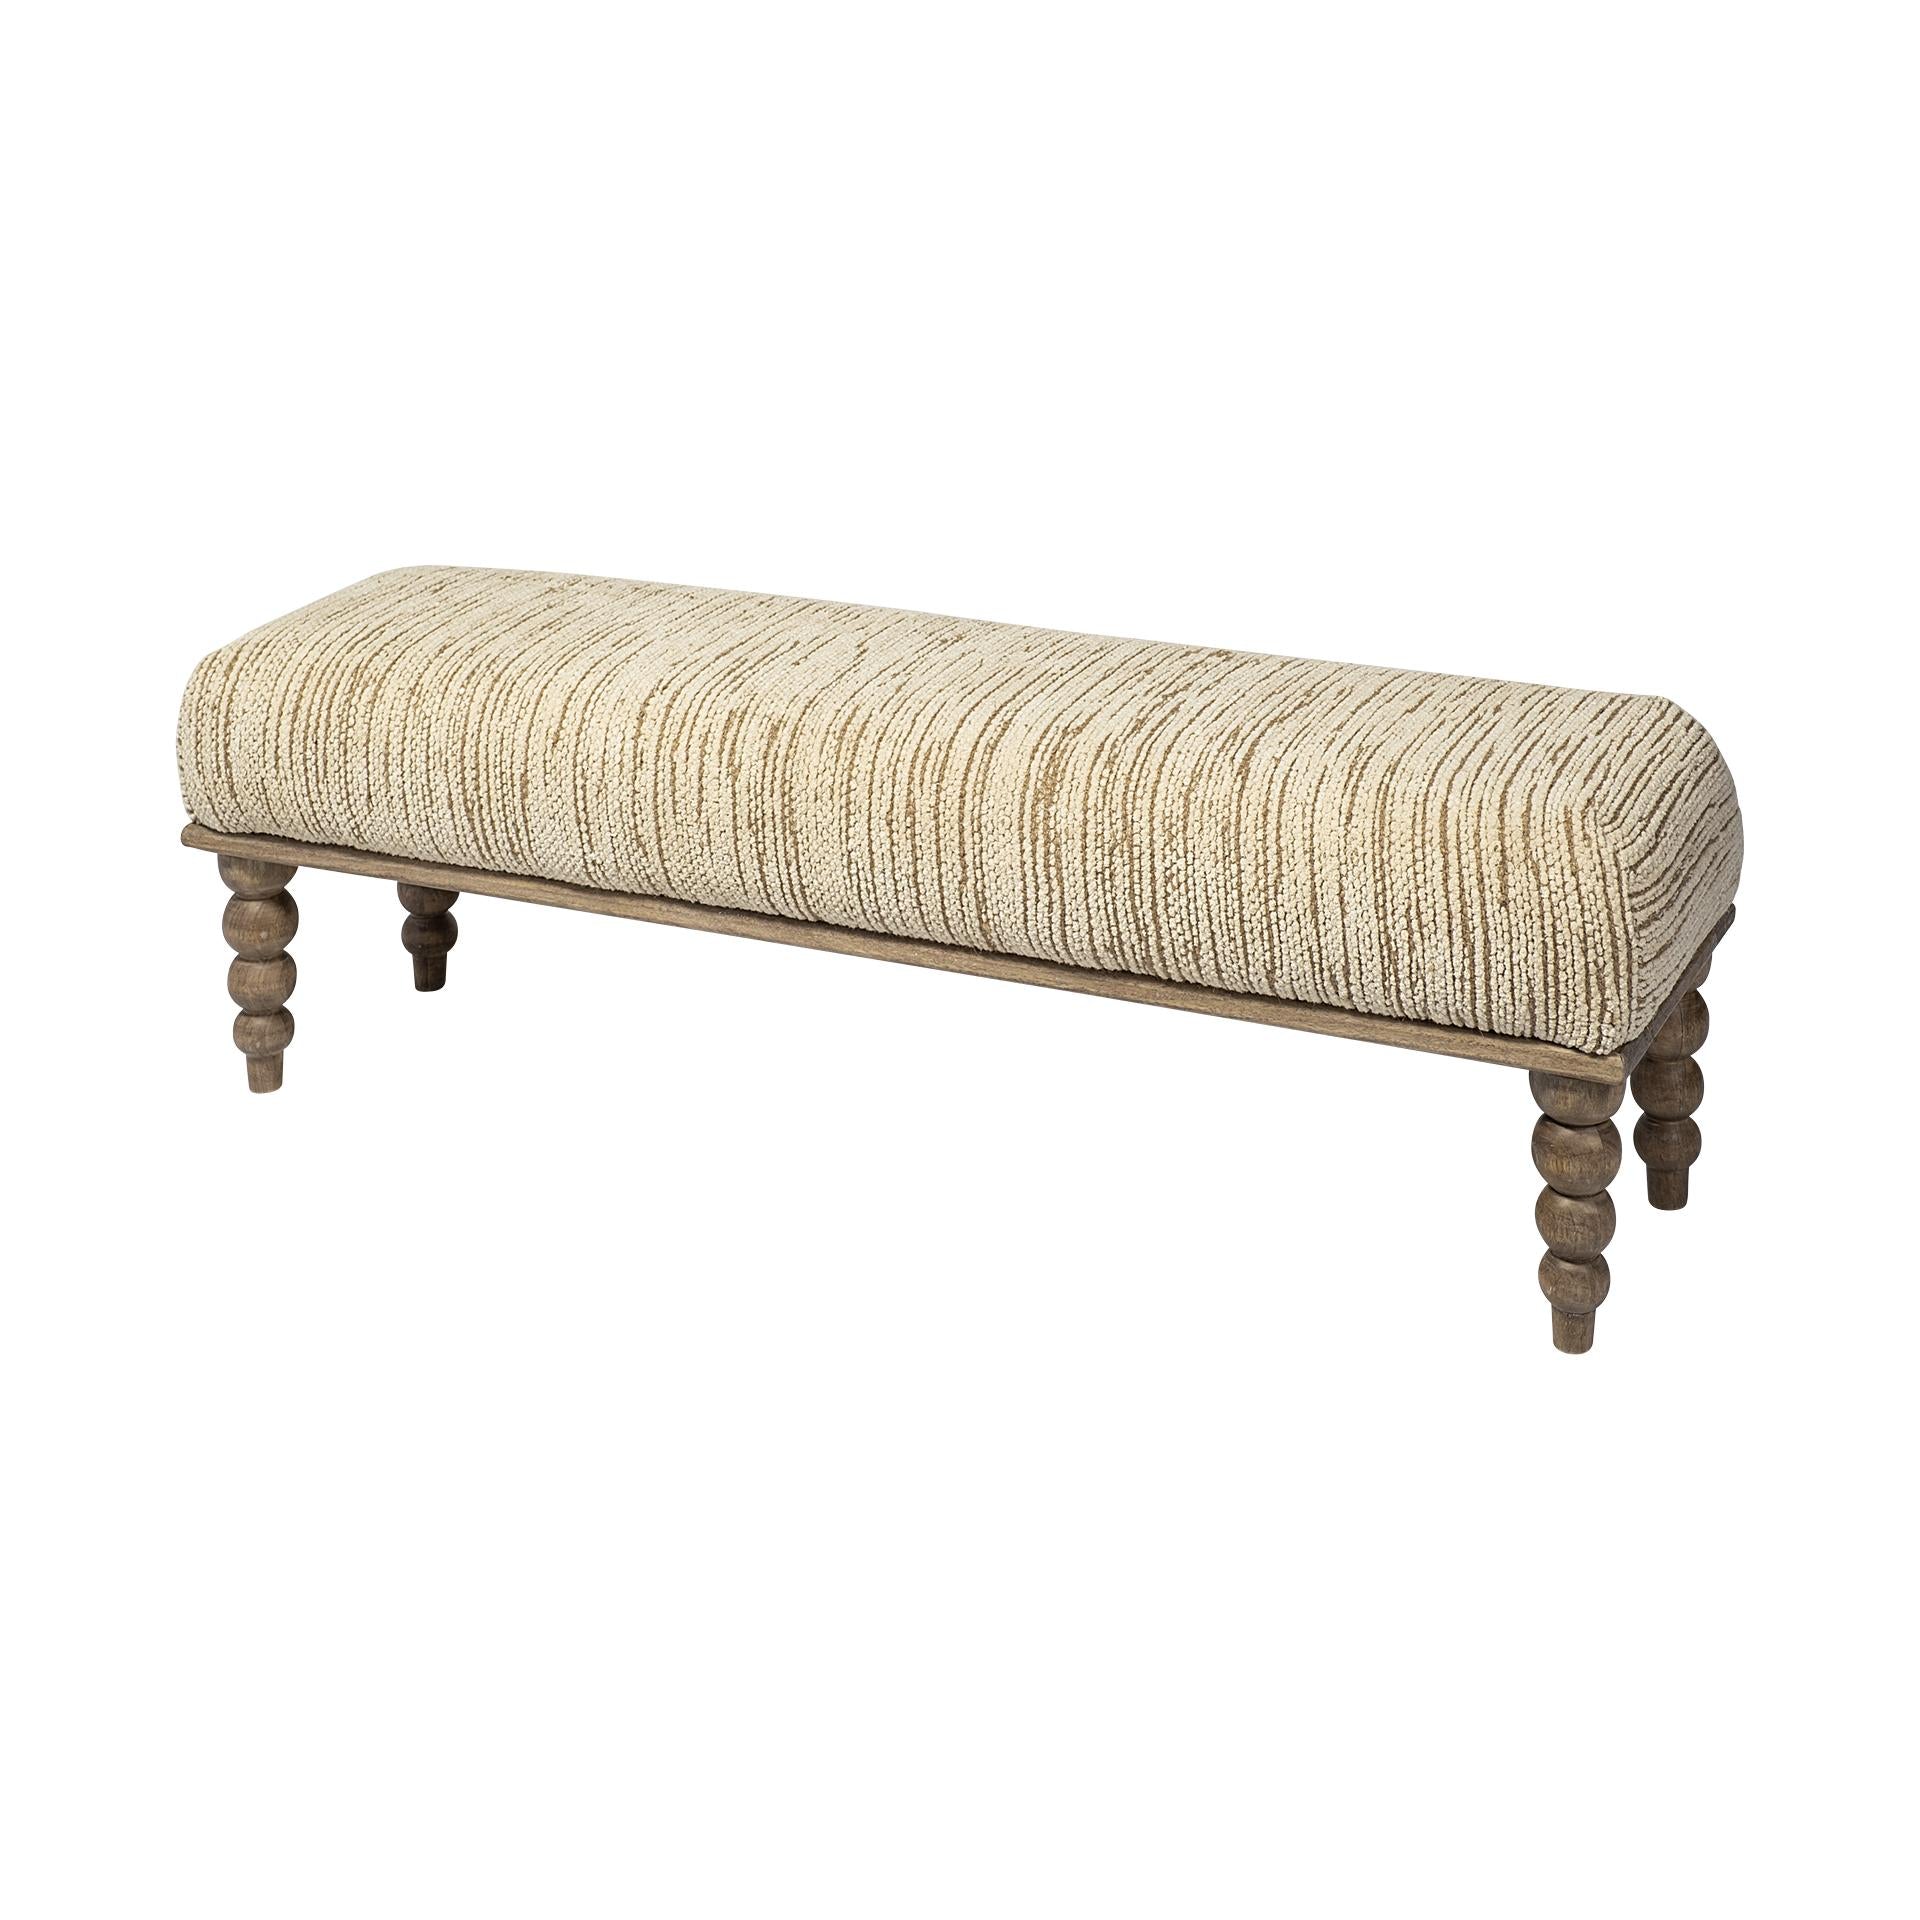 Rectangular Indian Mango WoodNatural-Brown Polished W Upholstered Cream Seat Accent Bench